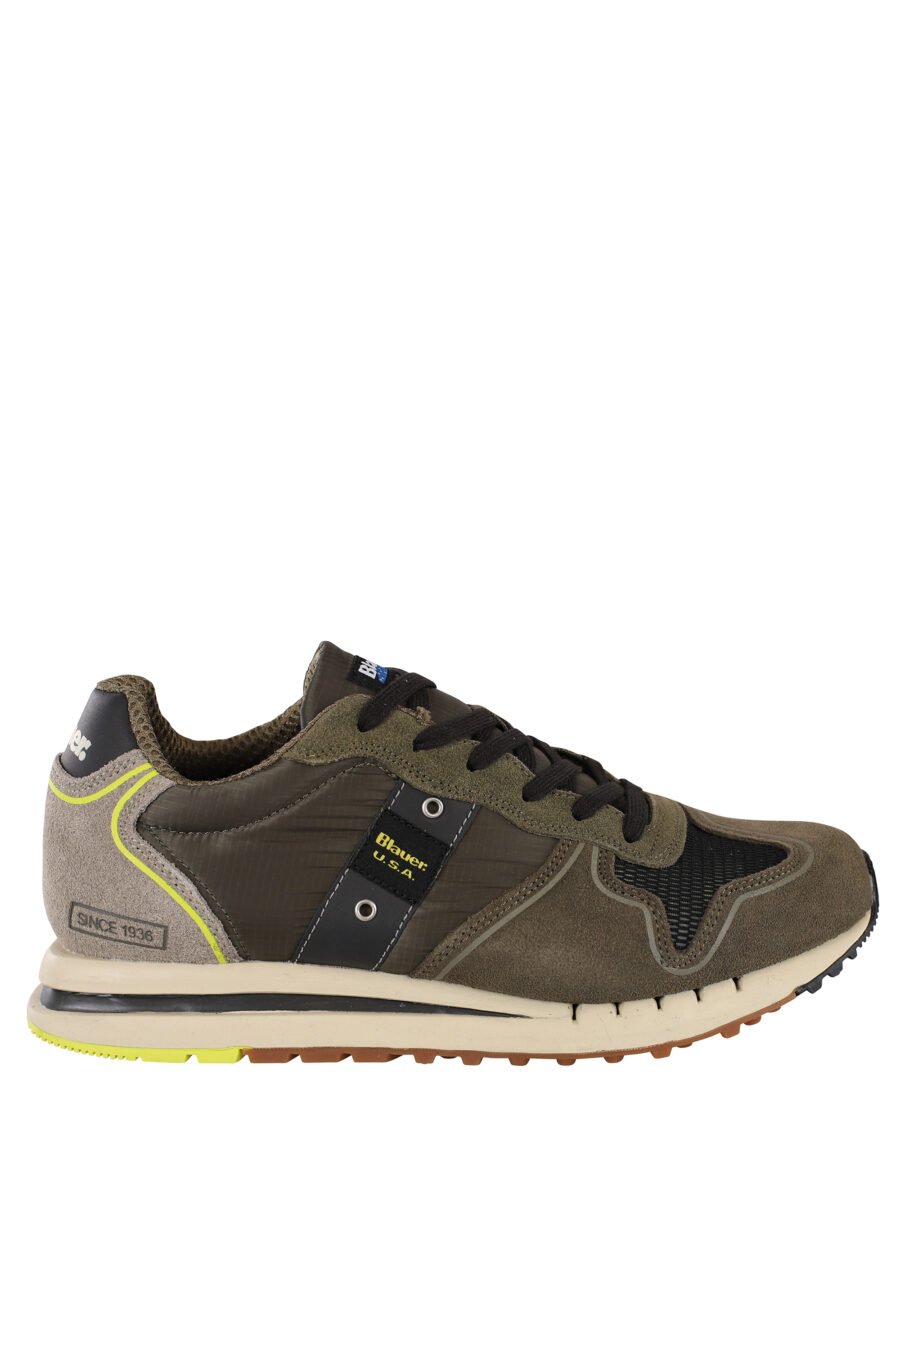 Trainers "quartz" military green multicoloured with breathable mesh - IMG 6832